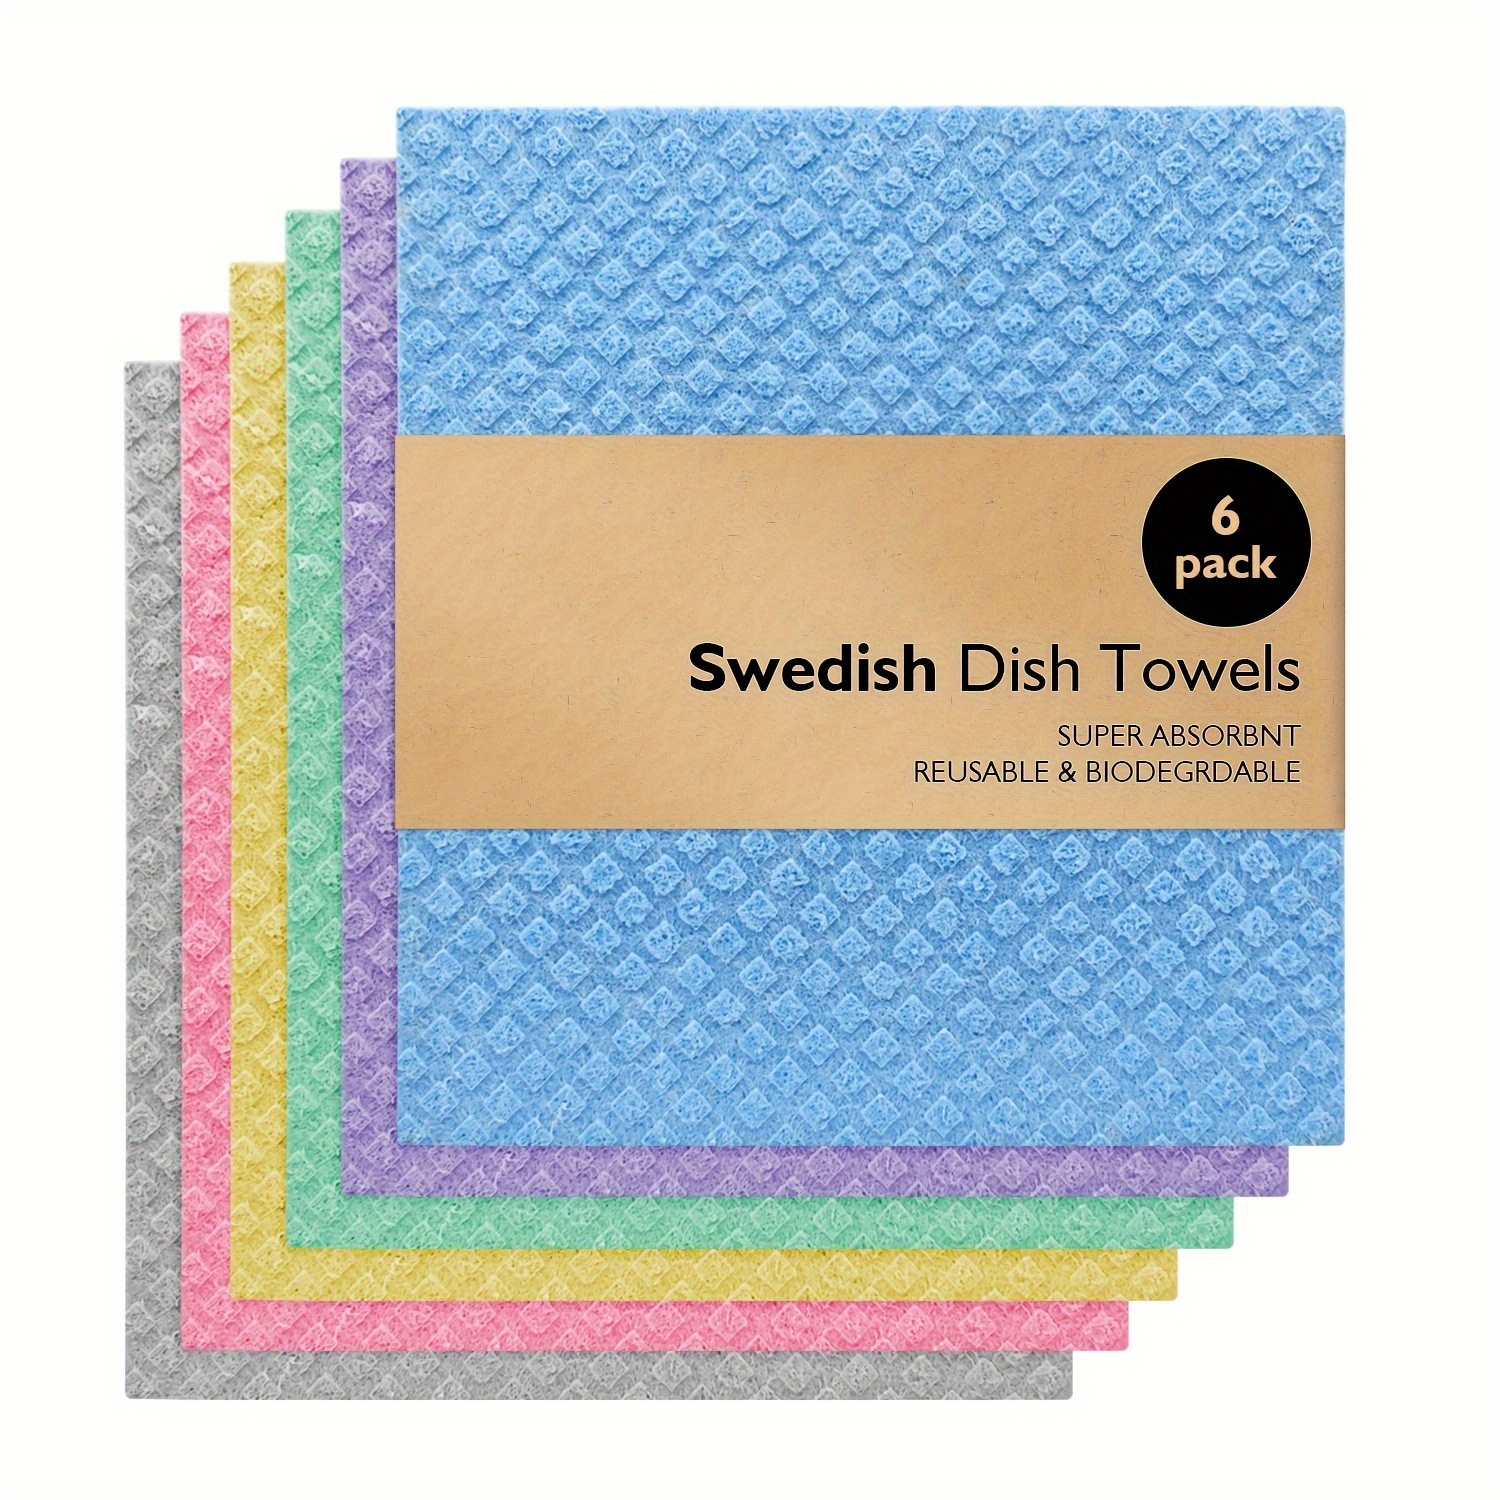 Microfiber Dish Towels. To Purchase these LINK IN BIO under Idea